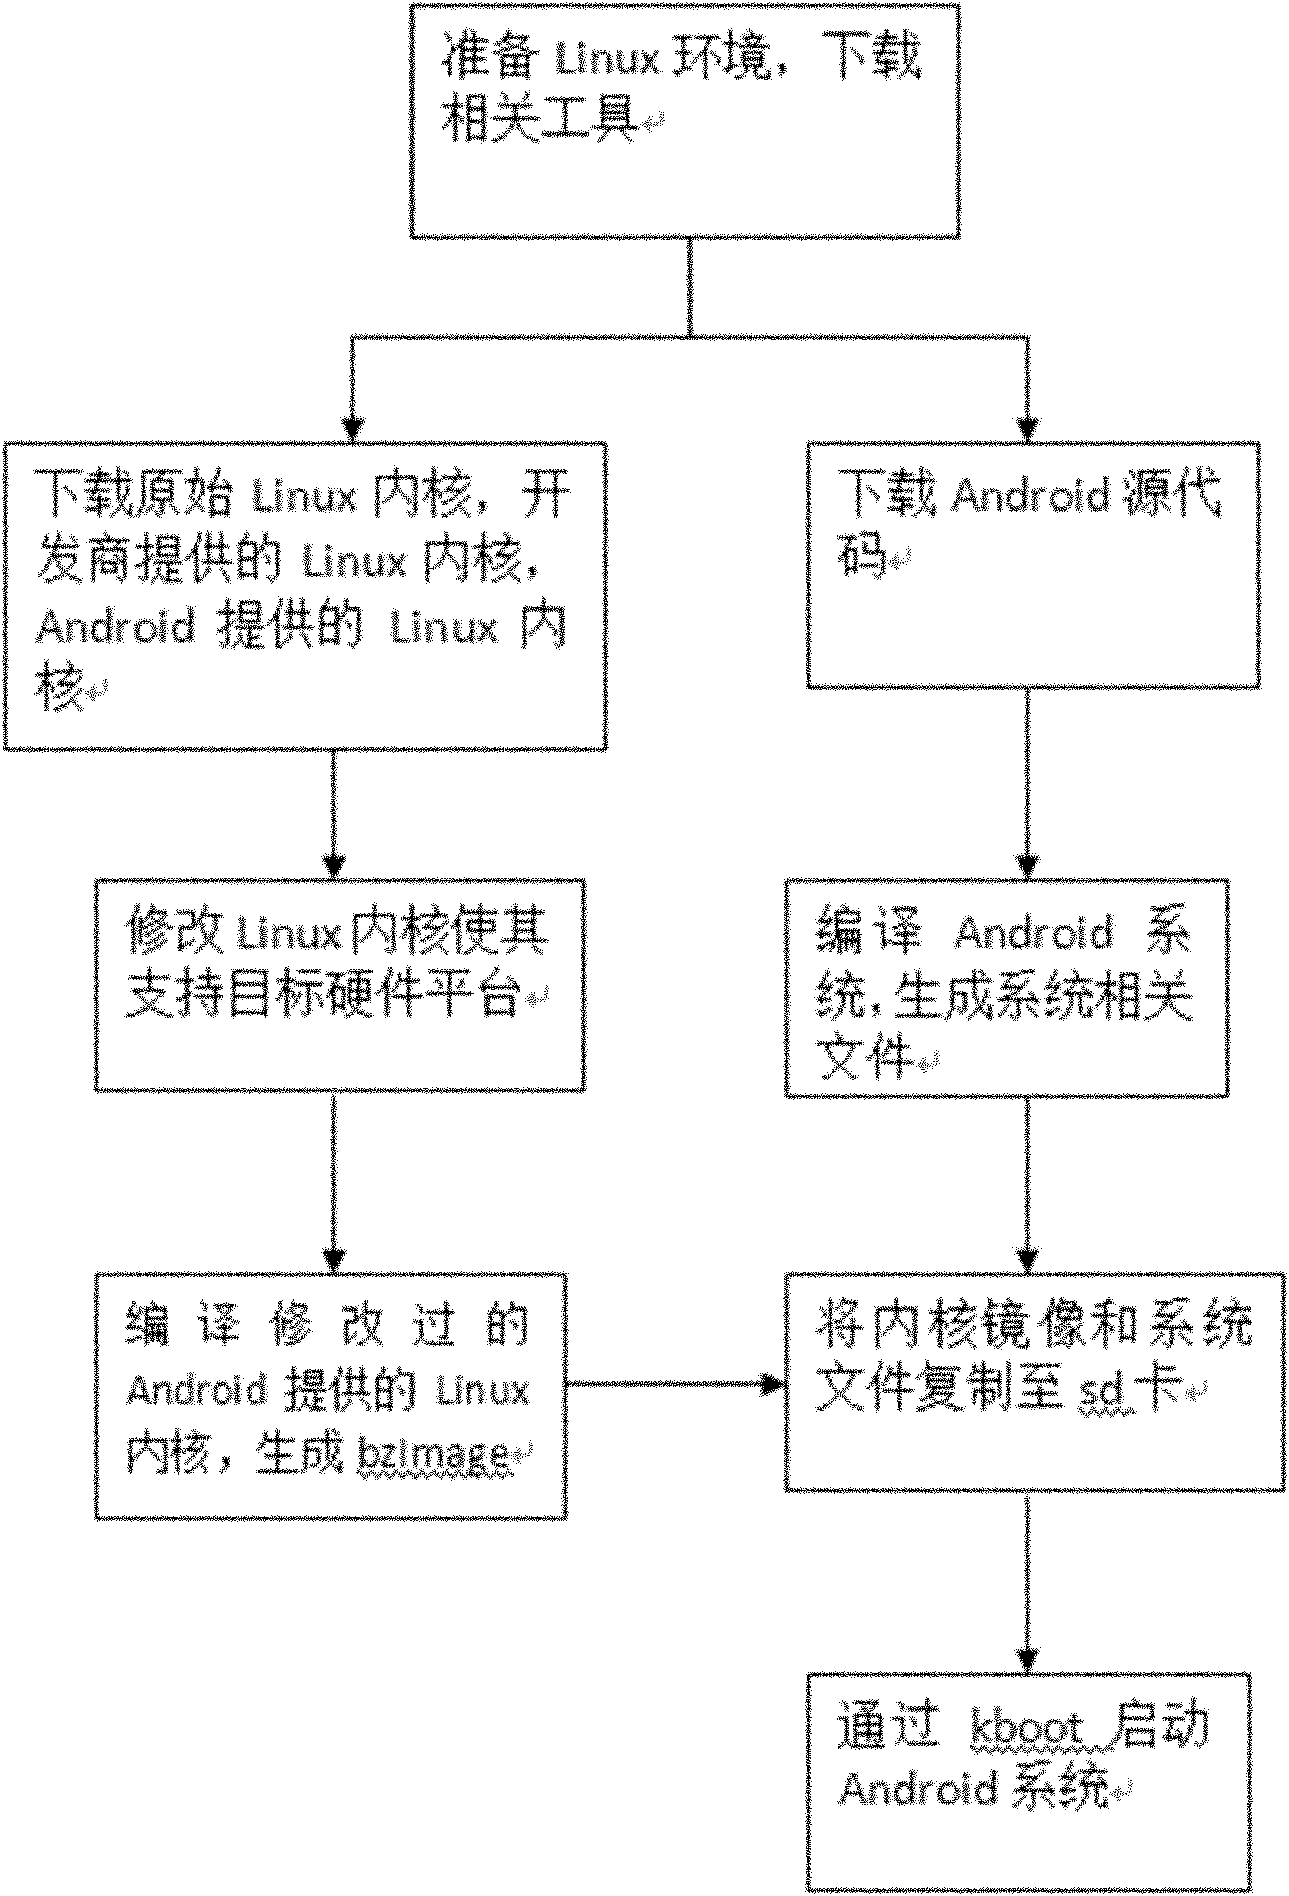 Method for transplanting Android mobile phone operating system to Atom development board